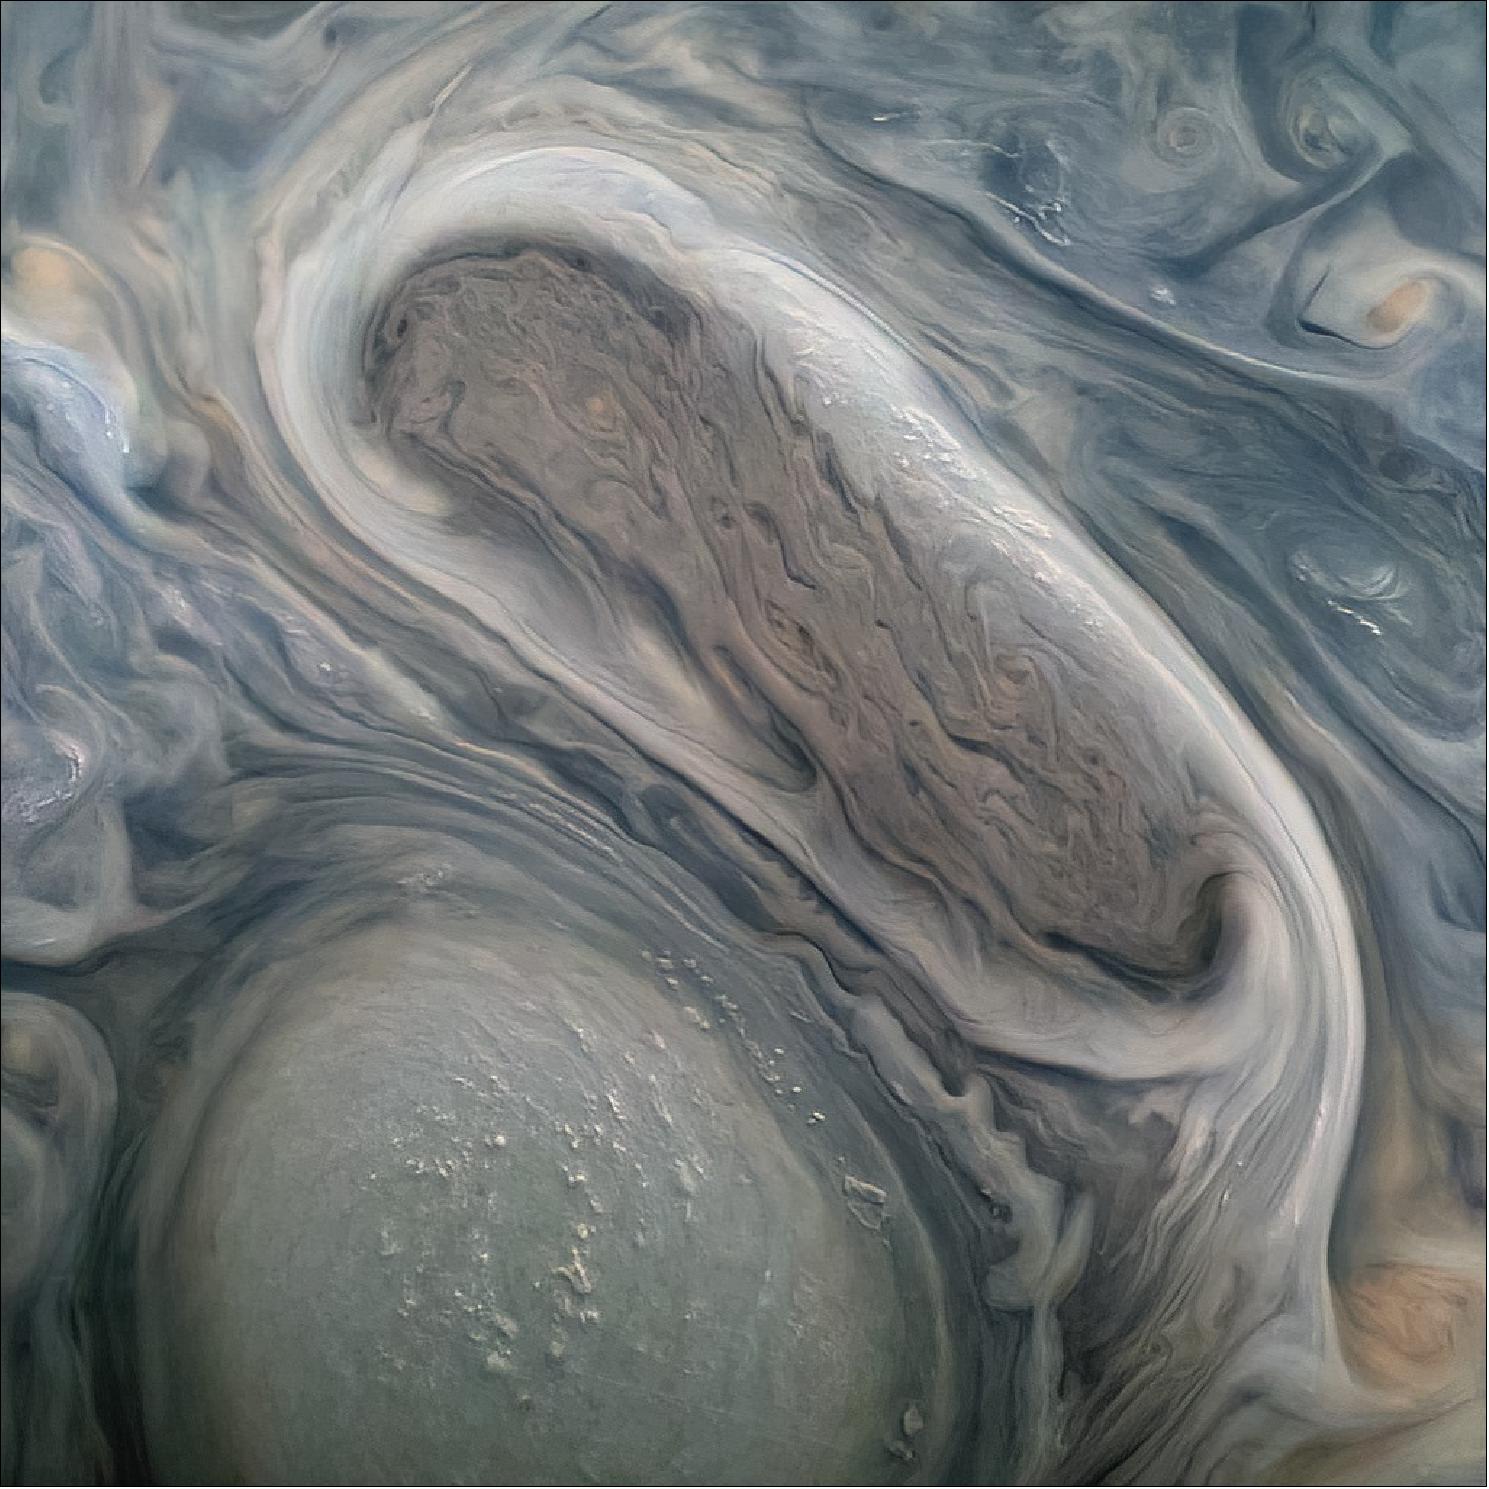 Figure 5: This JunoCam image shows two of Jupiter's large rotating storms, captured on Juno's 38th perijove pass, on Nov. 29, 2021 (image credit: NASA/JPL-Caltech/SwRI/MSSS Image processing: Kevin M. Gill CC BY)